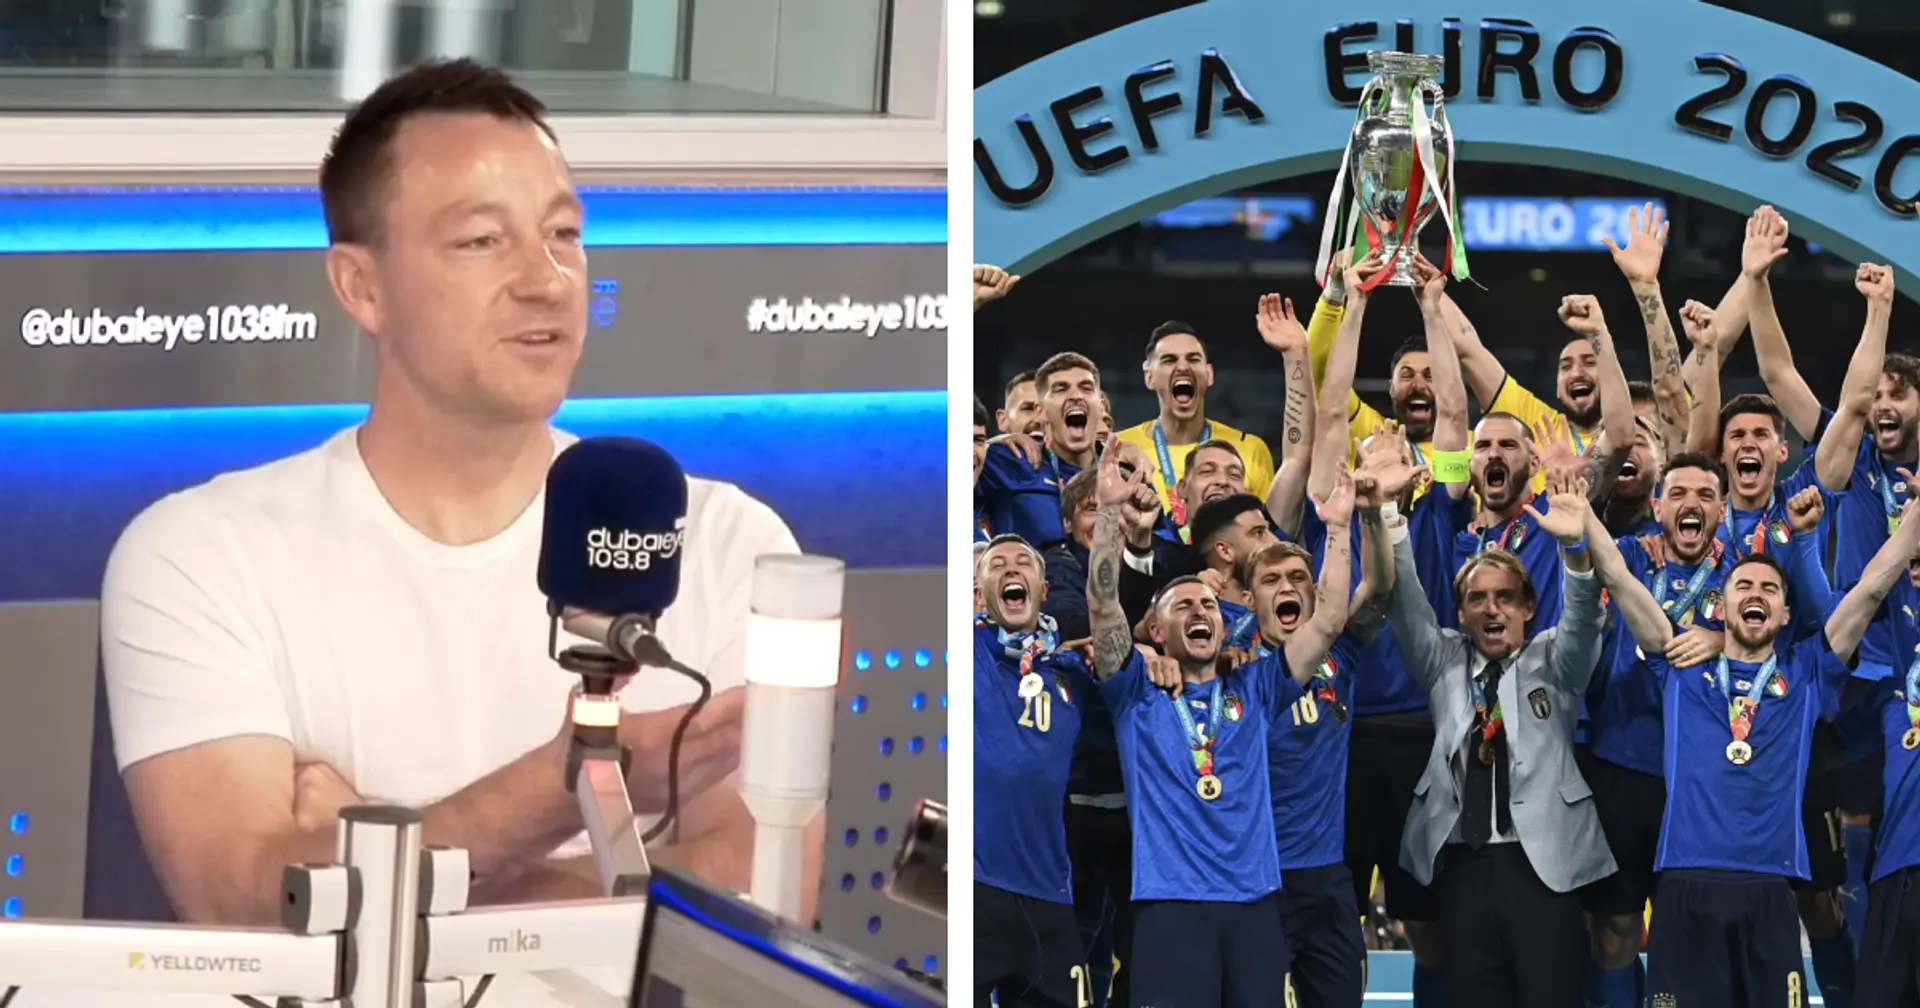 'The best of their generation, 2 top players': Chelsea legend John Terry names Europe's best centre-back duo